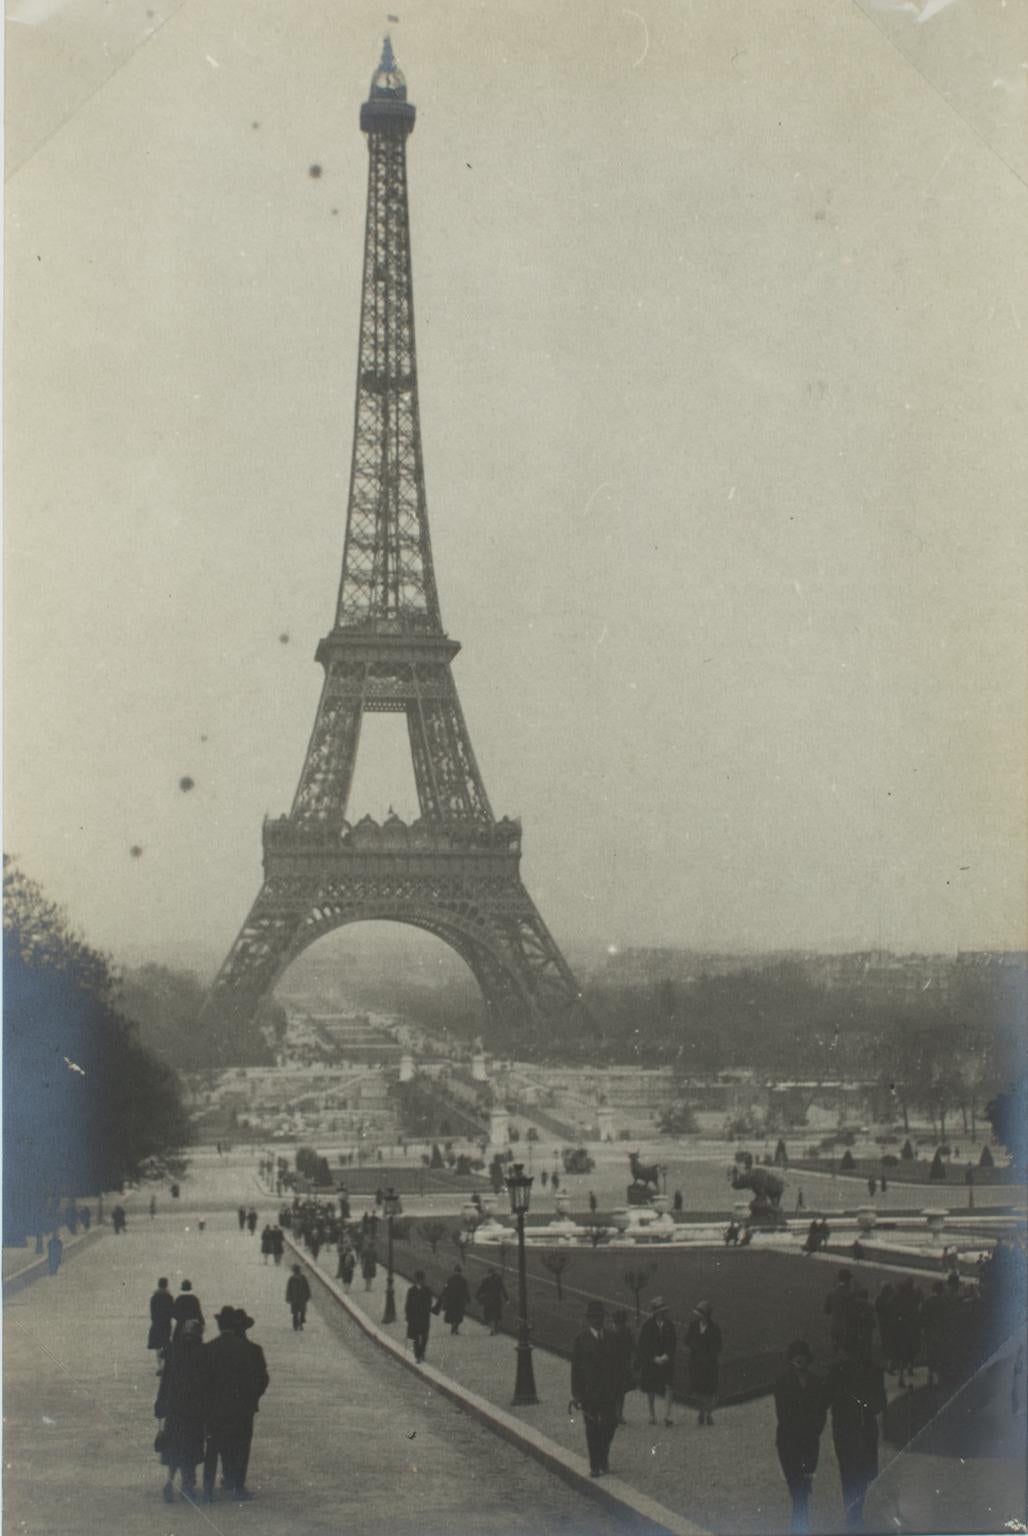 Unknown Landscape Photograph - The Eiffel Tower in Paris 1927 - Silver Gelatin Black and White Photograph